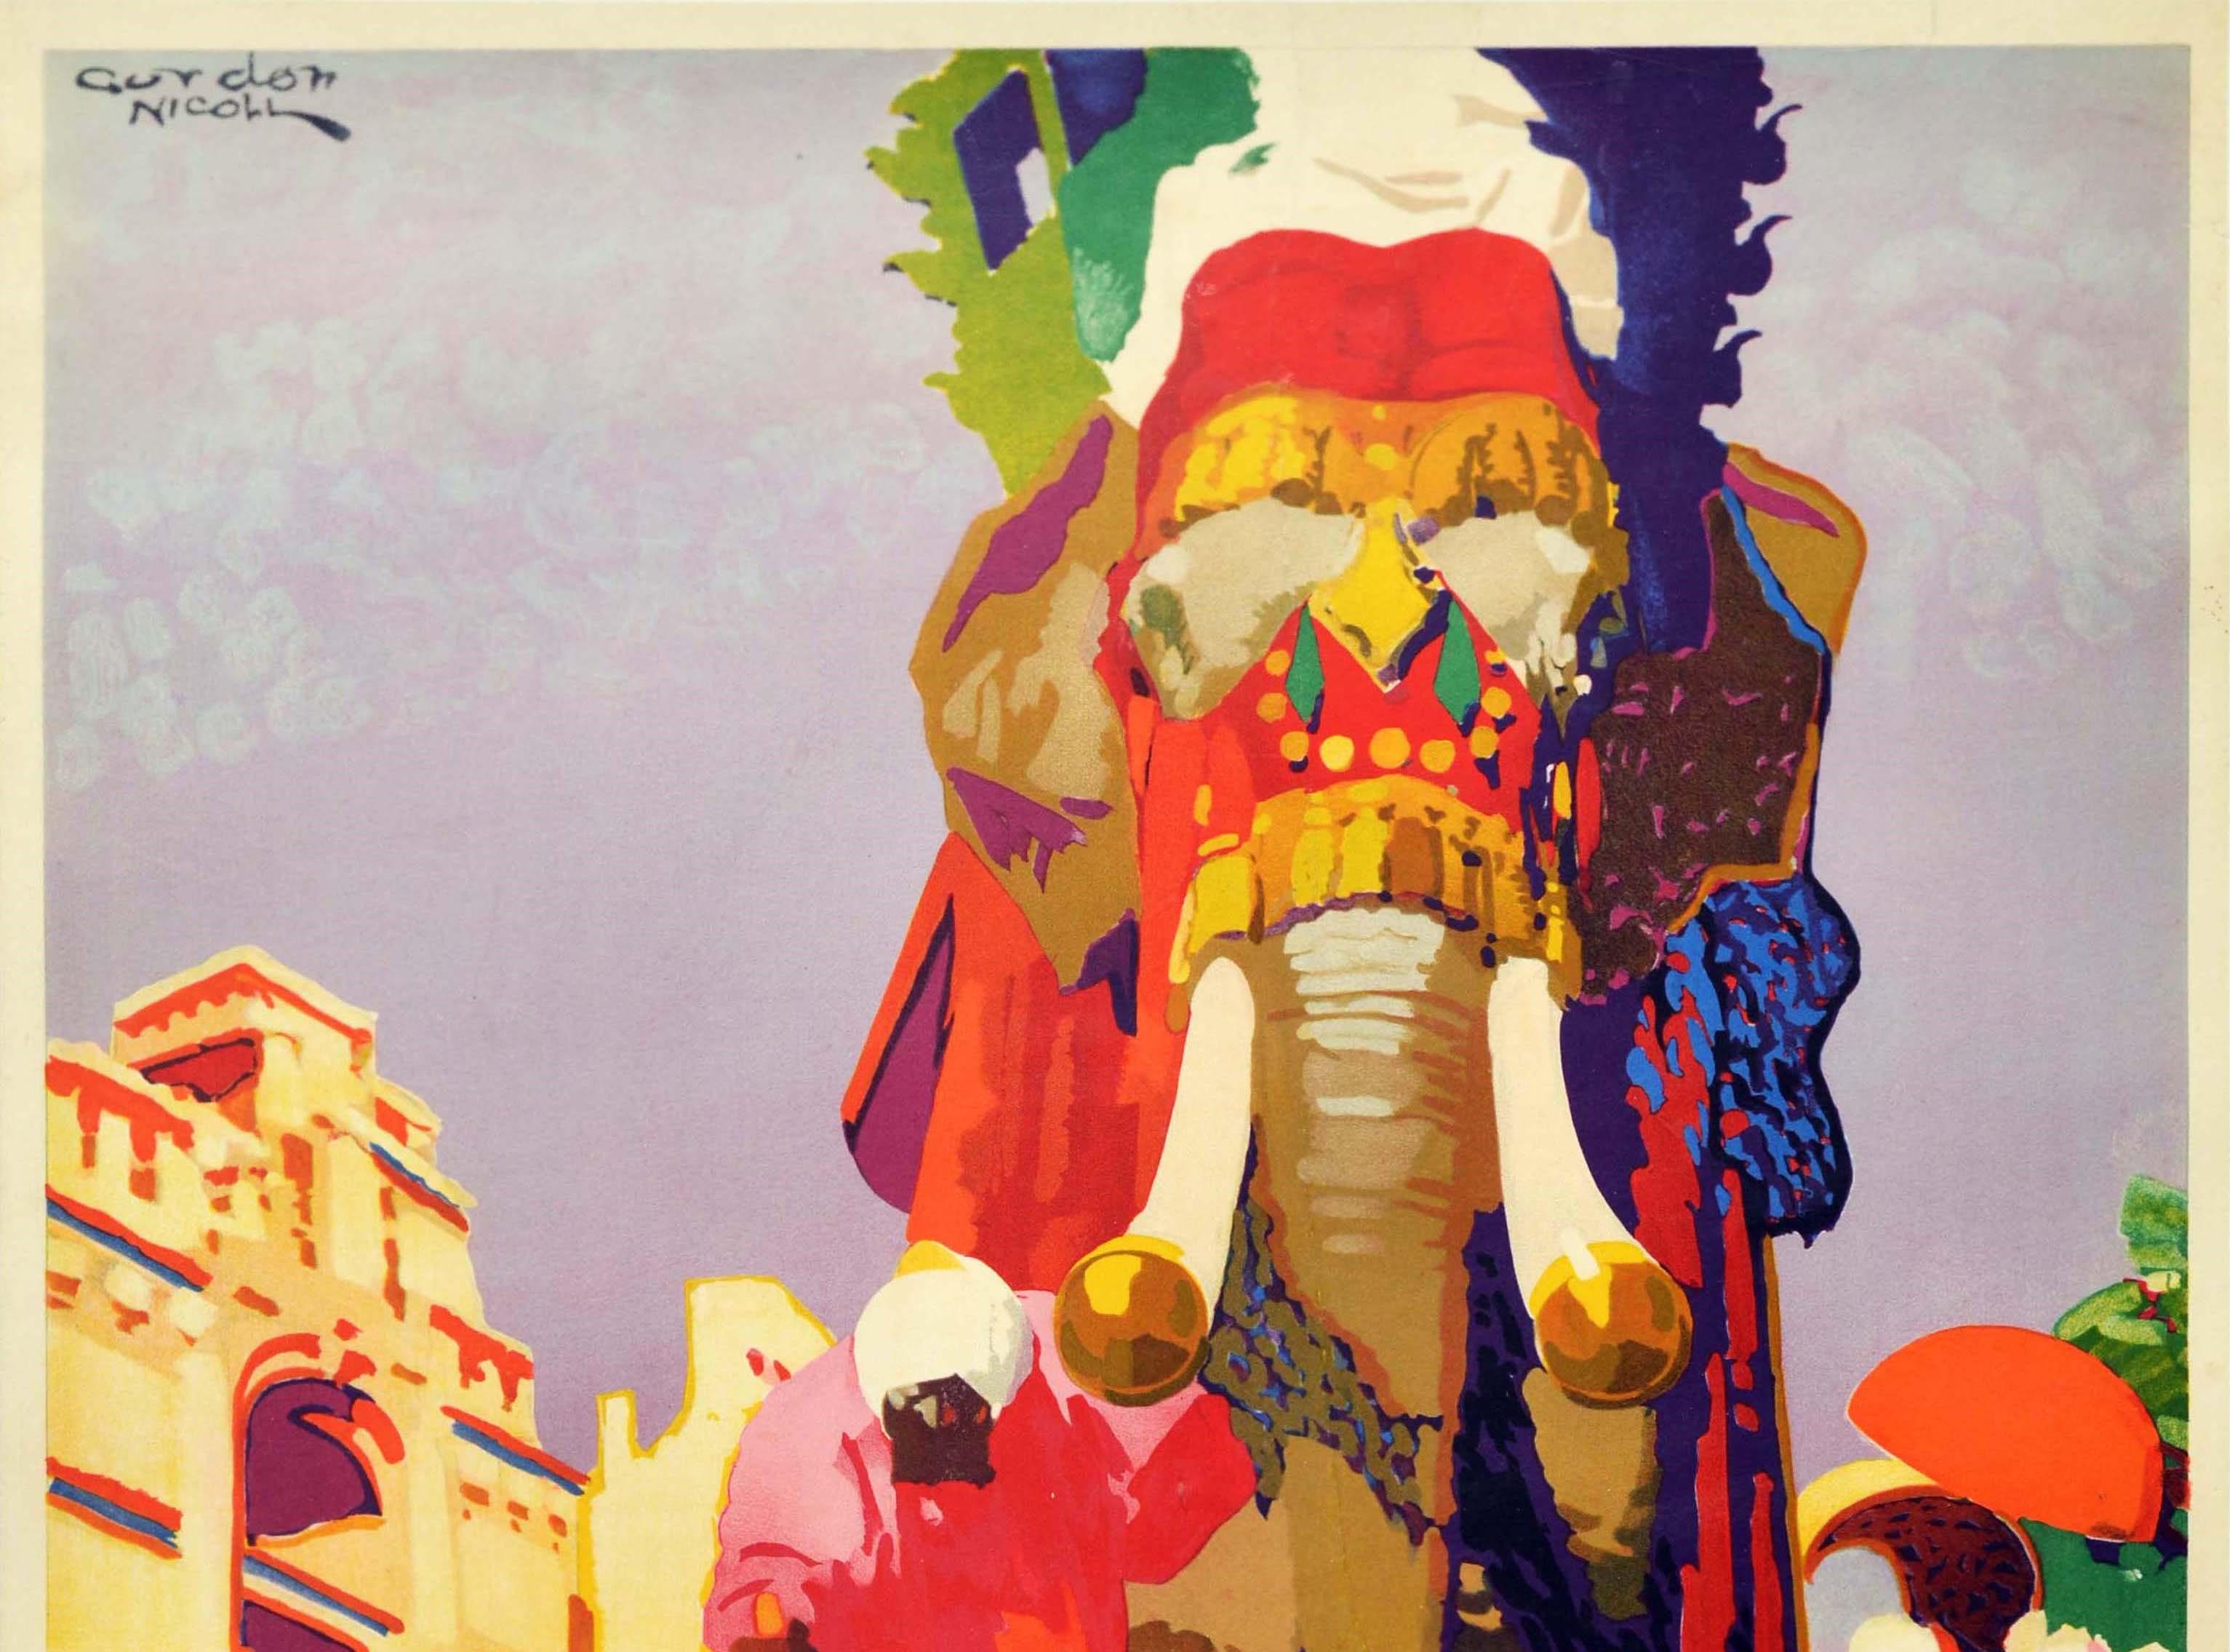 Original vintage cruise travel poster advertising Anchor Line to Gibraltar Egypt and India featuring a colourful design by the illustrator and artist Gordon William Nicoll (1888-1959) of an Indian elephant decorated for a festival being led towards